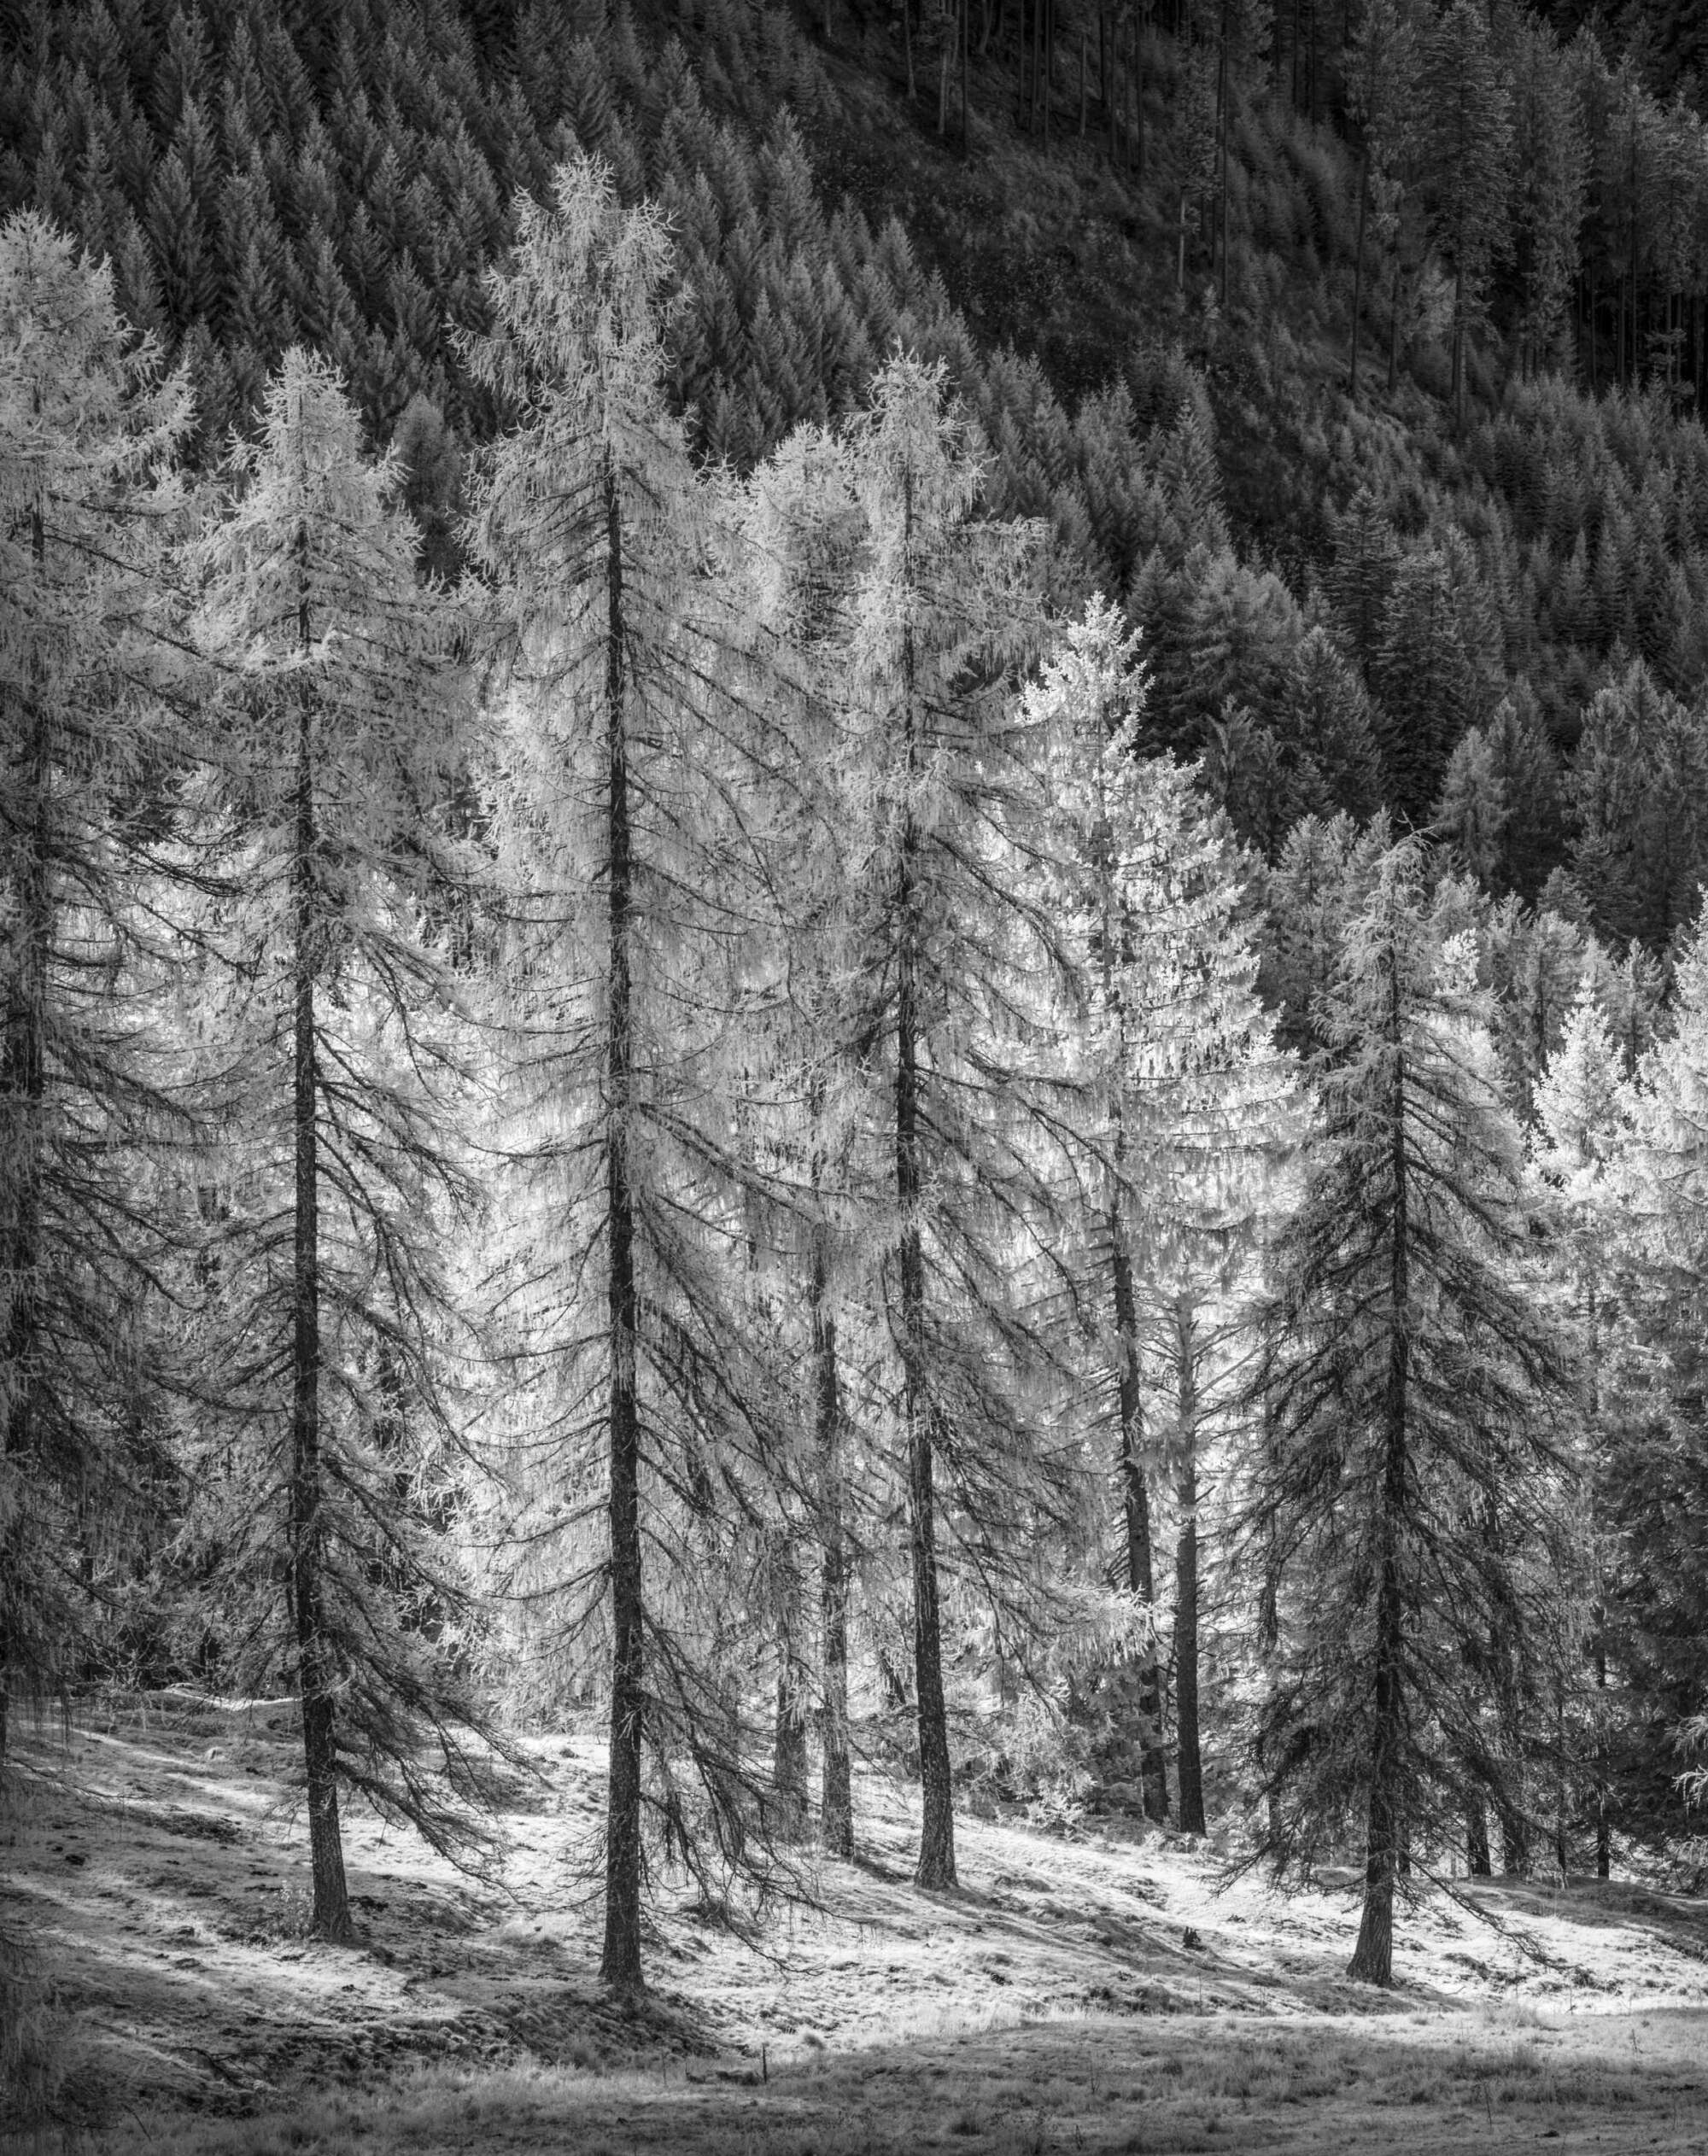 Evening Light and Pines Italian Dolomotes by Paul Gallagher aspect2i